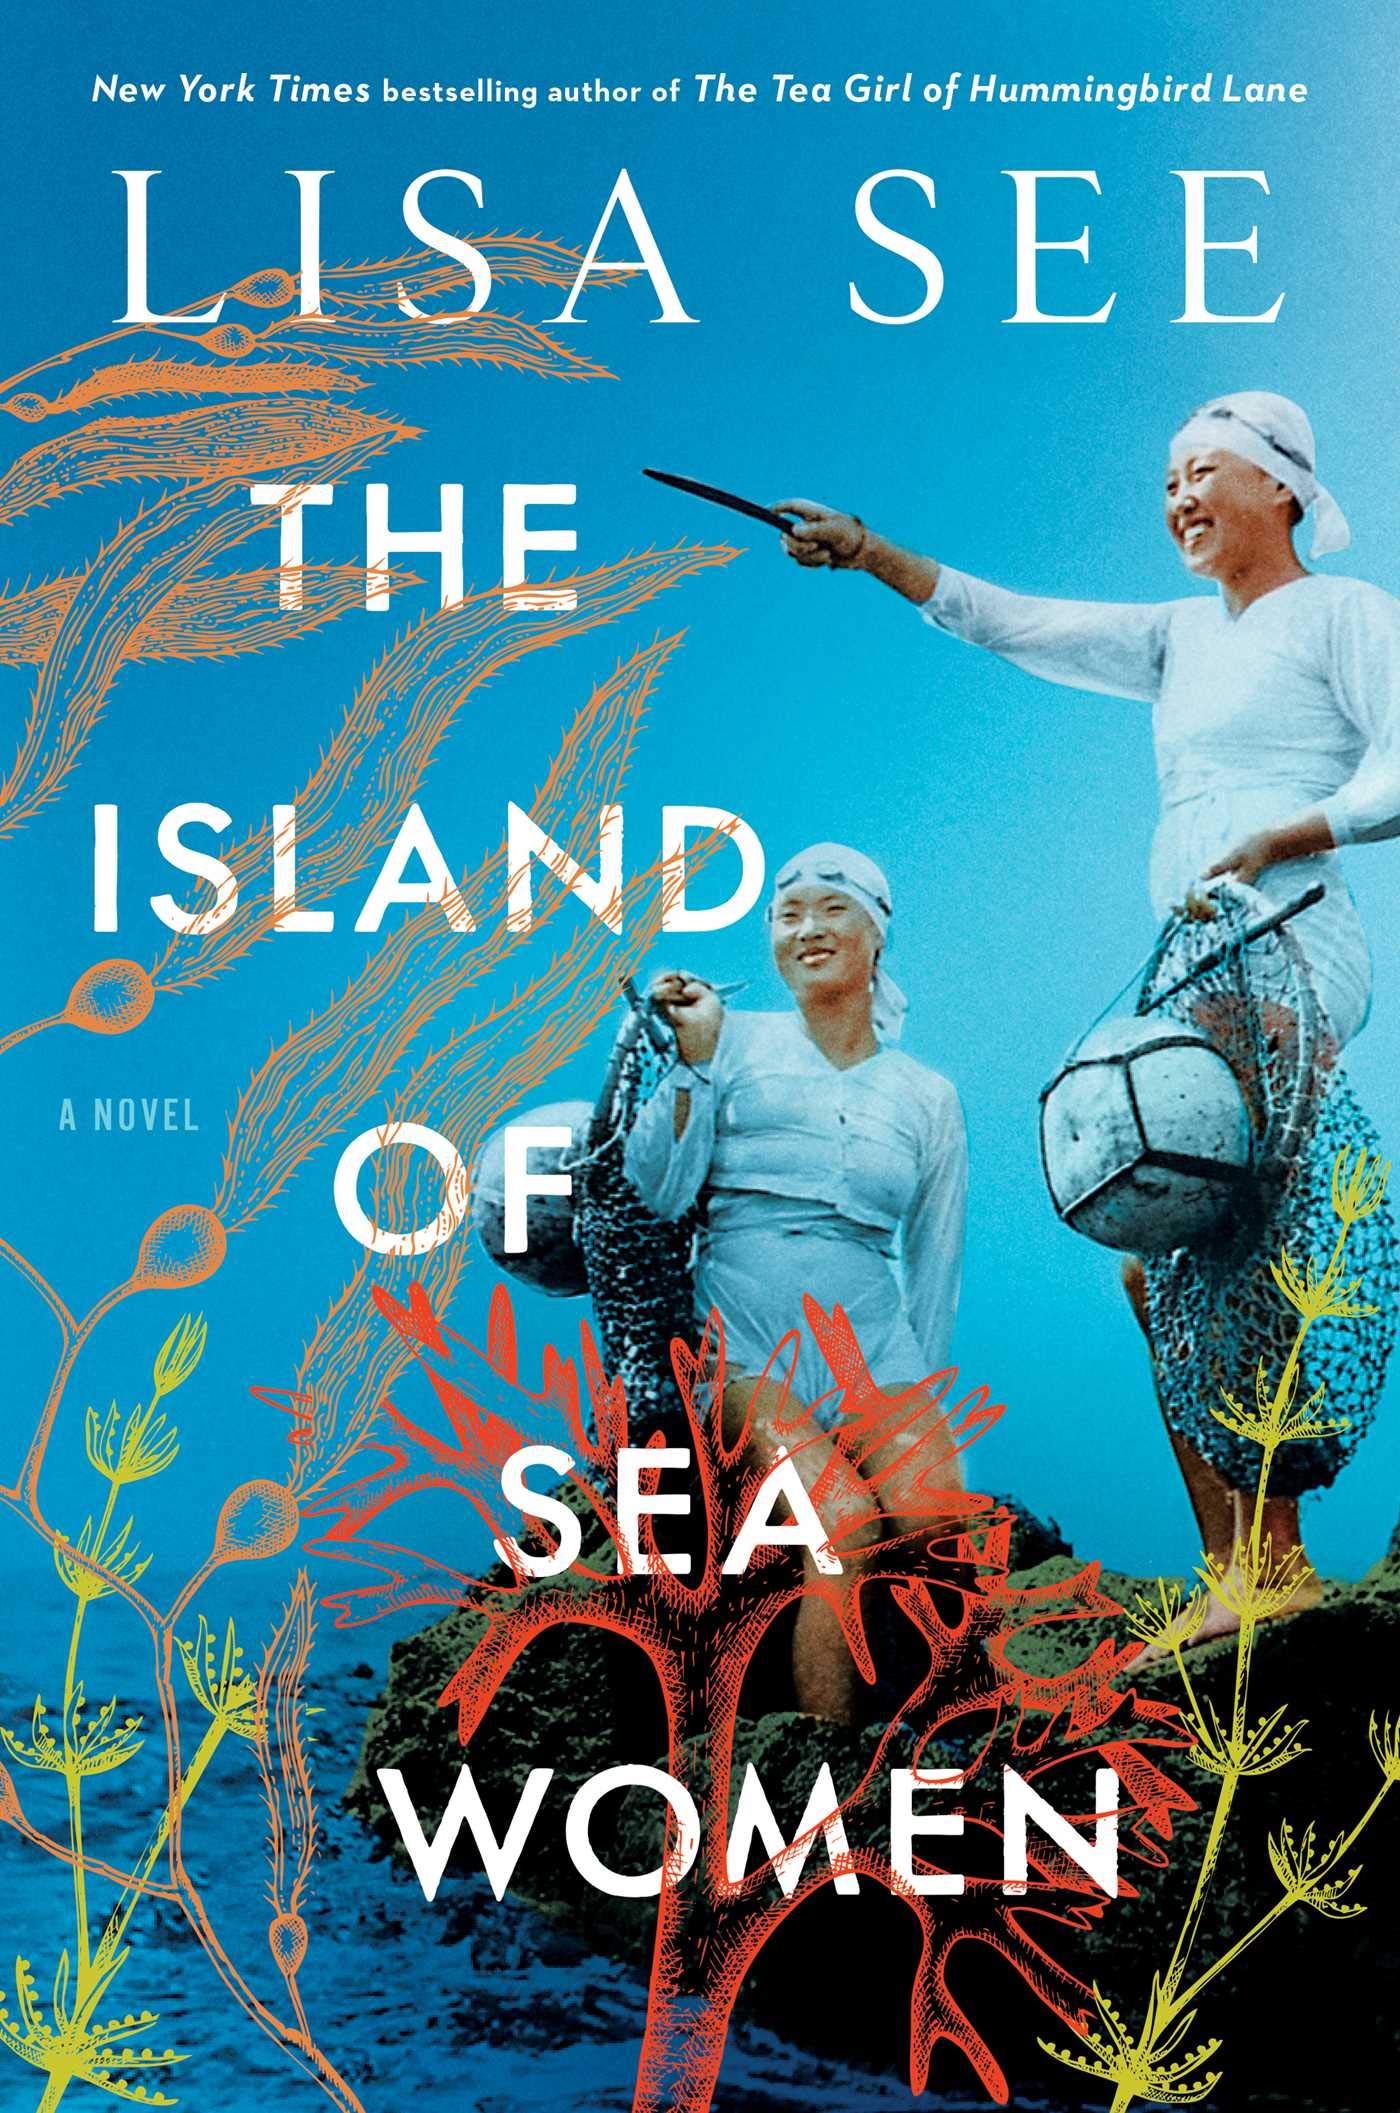 Book cover for The Island of Sea Women by Lisa See.